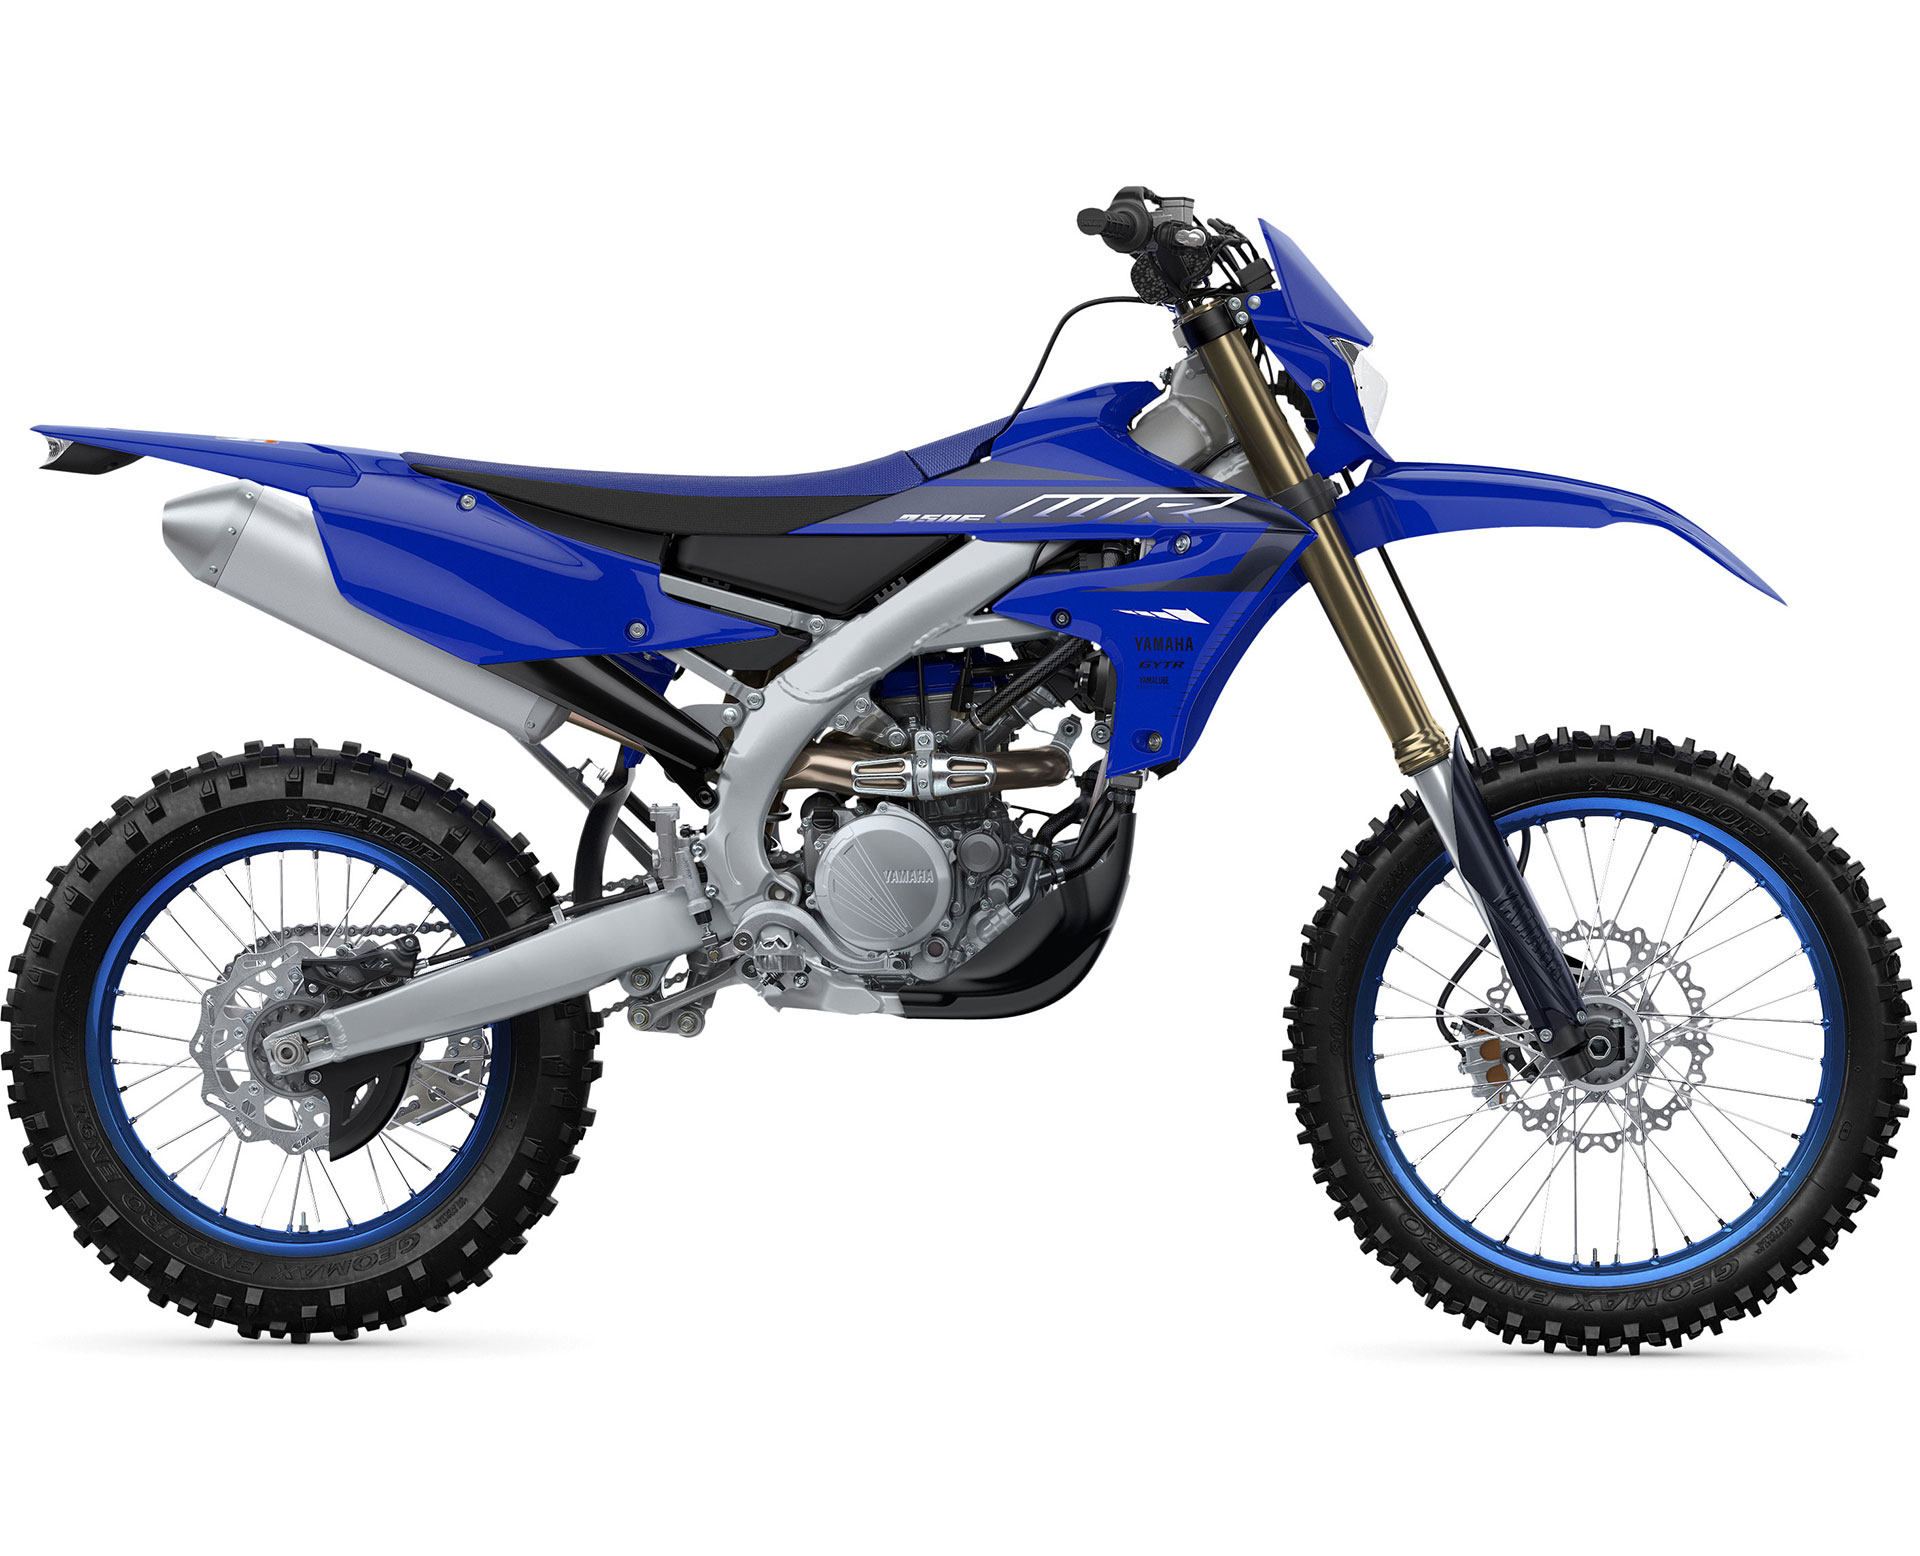 Thumbnail of your customized WR250F 2023